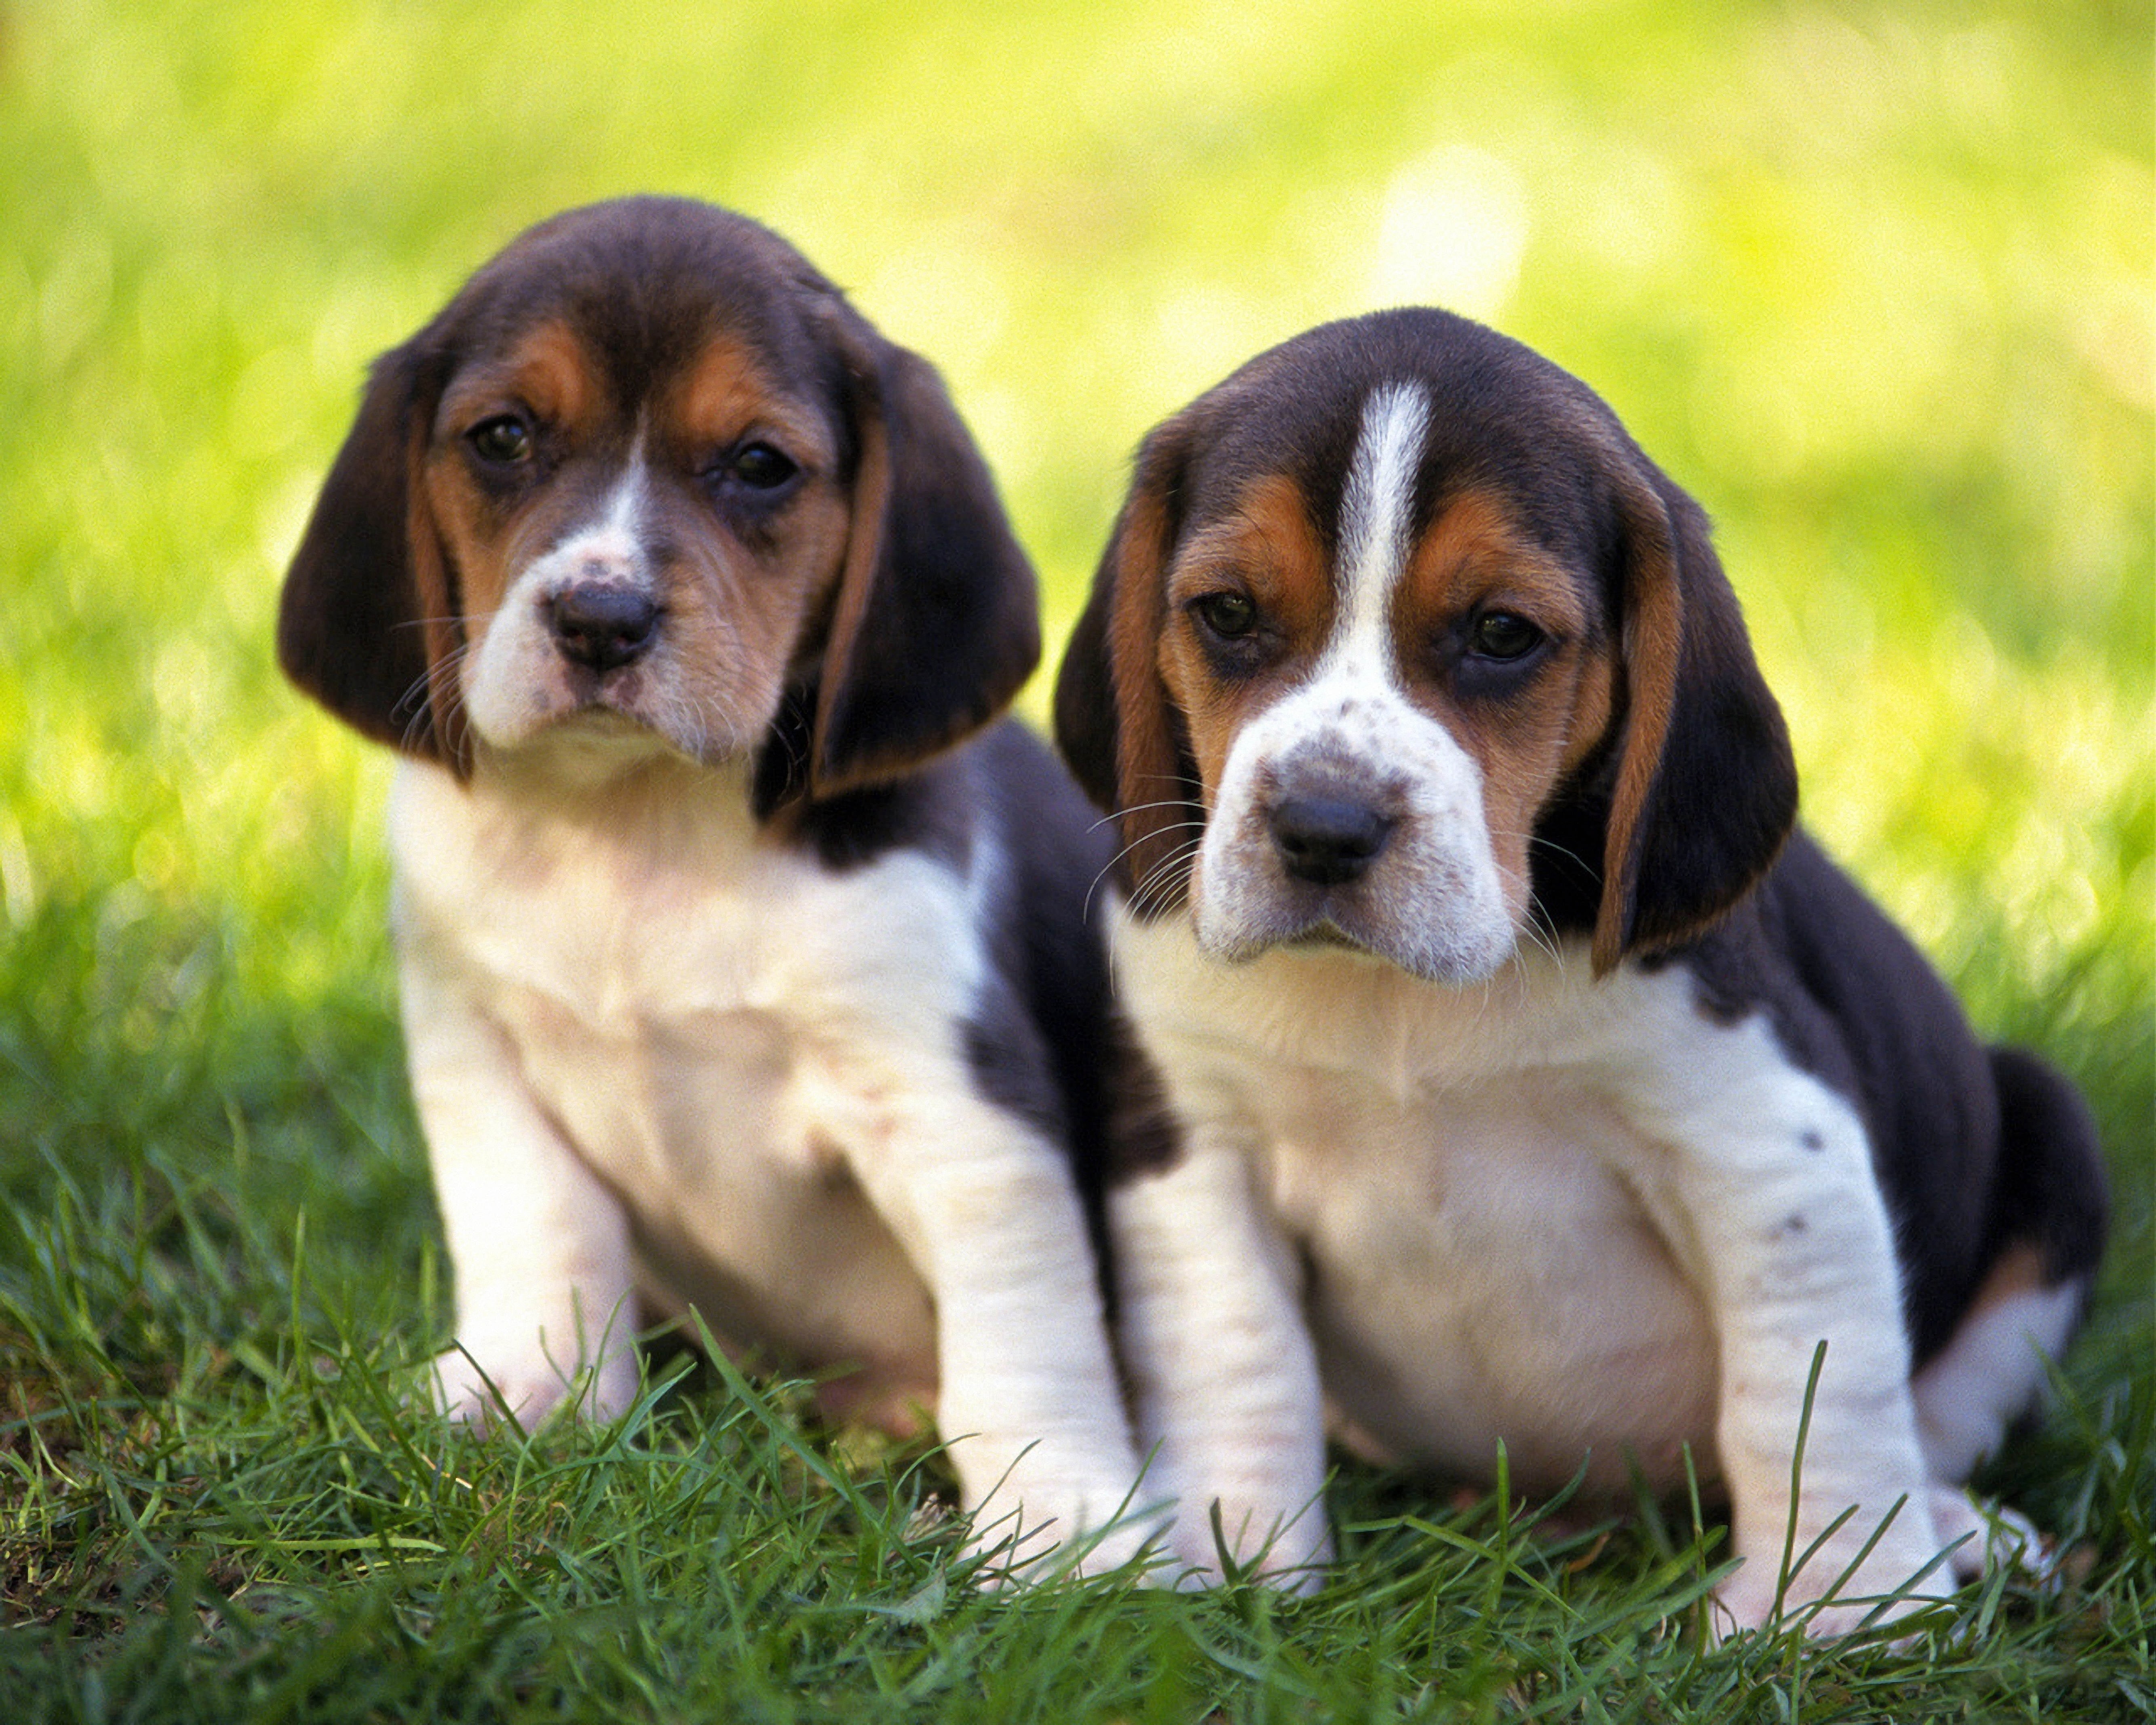 depth of field photo of two short coated white-brown-and-black puppies standing on green grass field